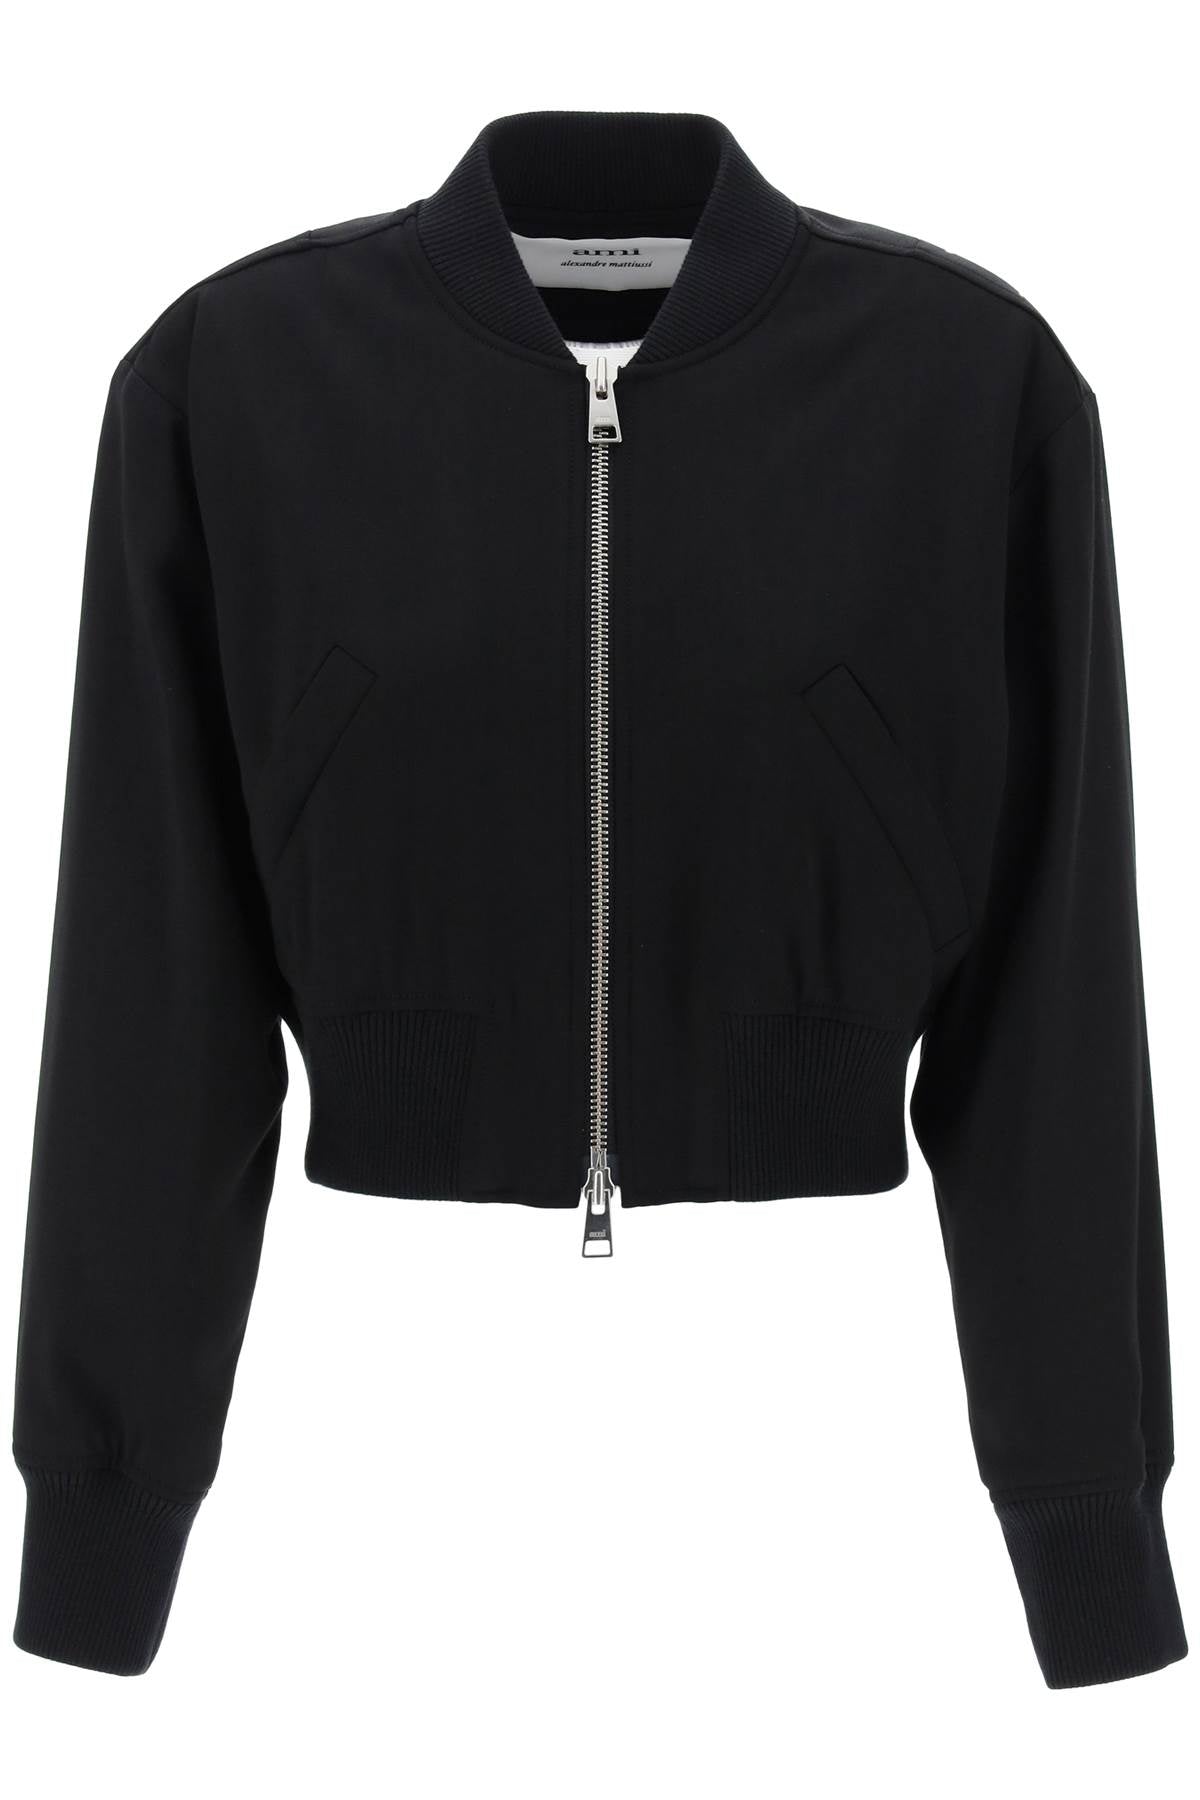 Ami paris bomber cropped in twill-0